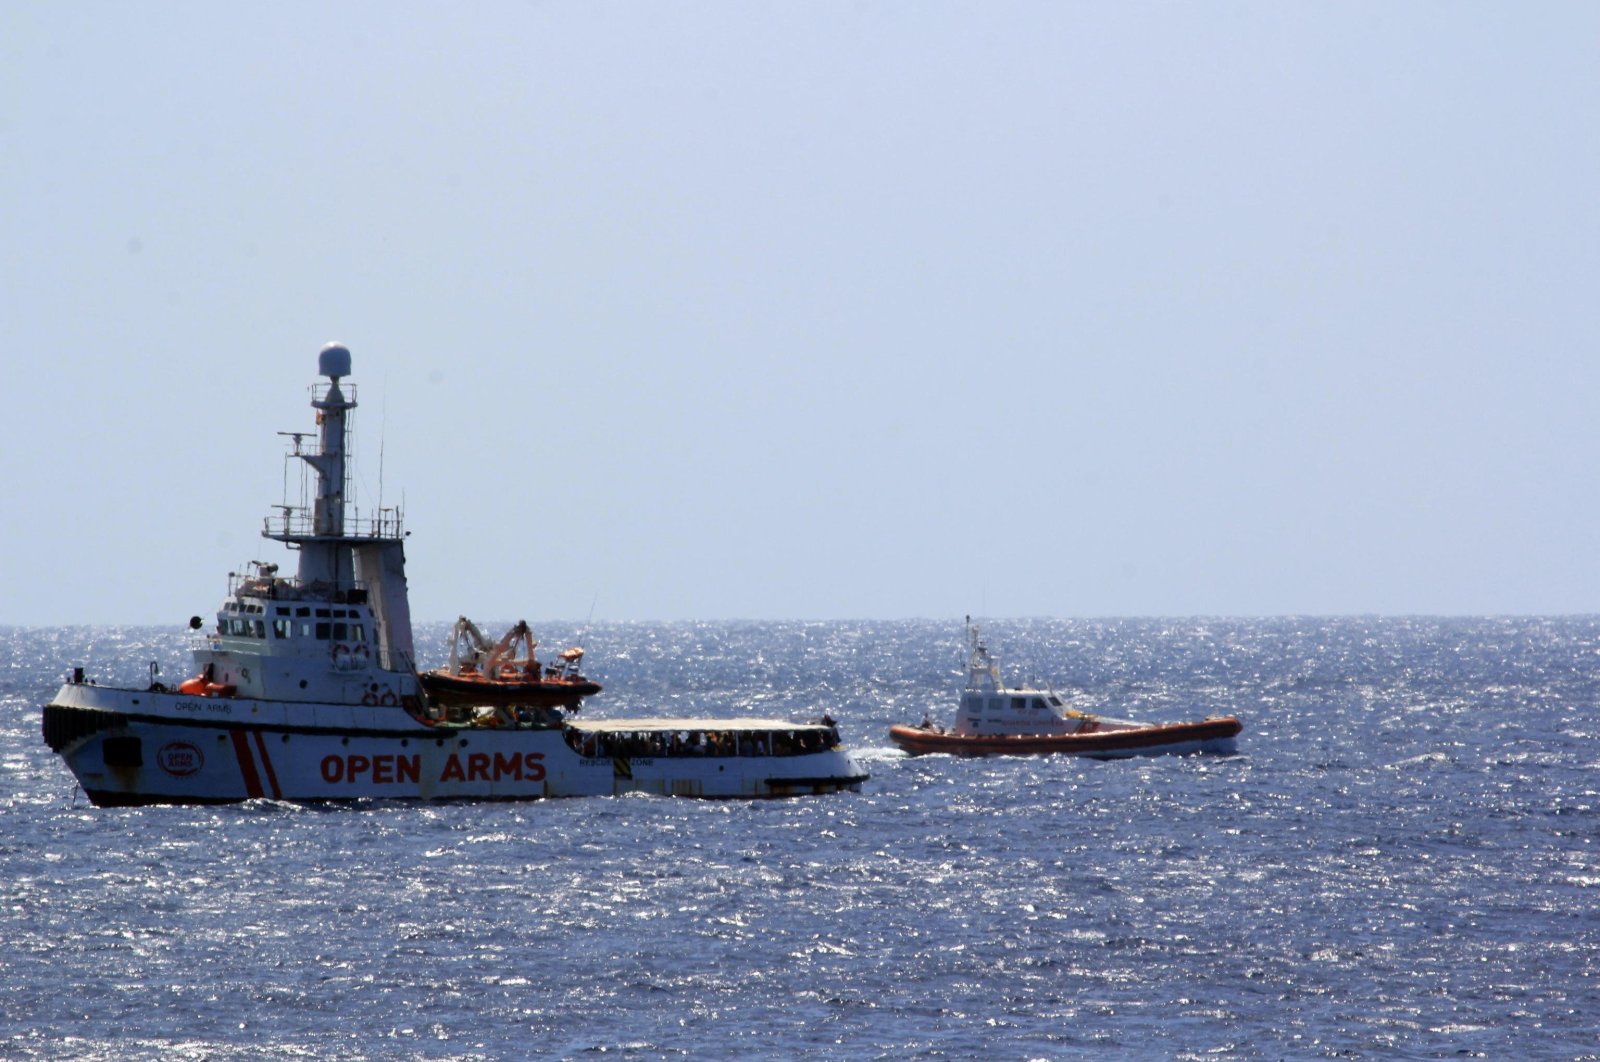 The Open Arms Spanish humanitarian boat (L) with 147 migrants is monitored by an Italian Coast guard vessel as it sails off the coasts of the Sicilian island of Lampedusa, southern Italy, Aug. 15, 2019. (AP Photo)